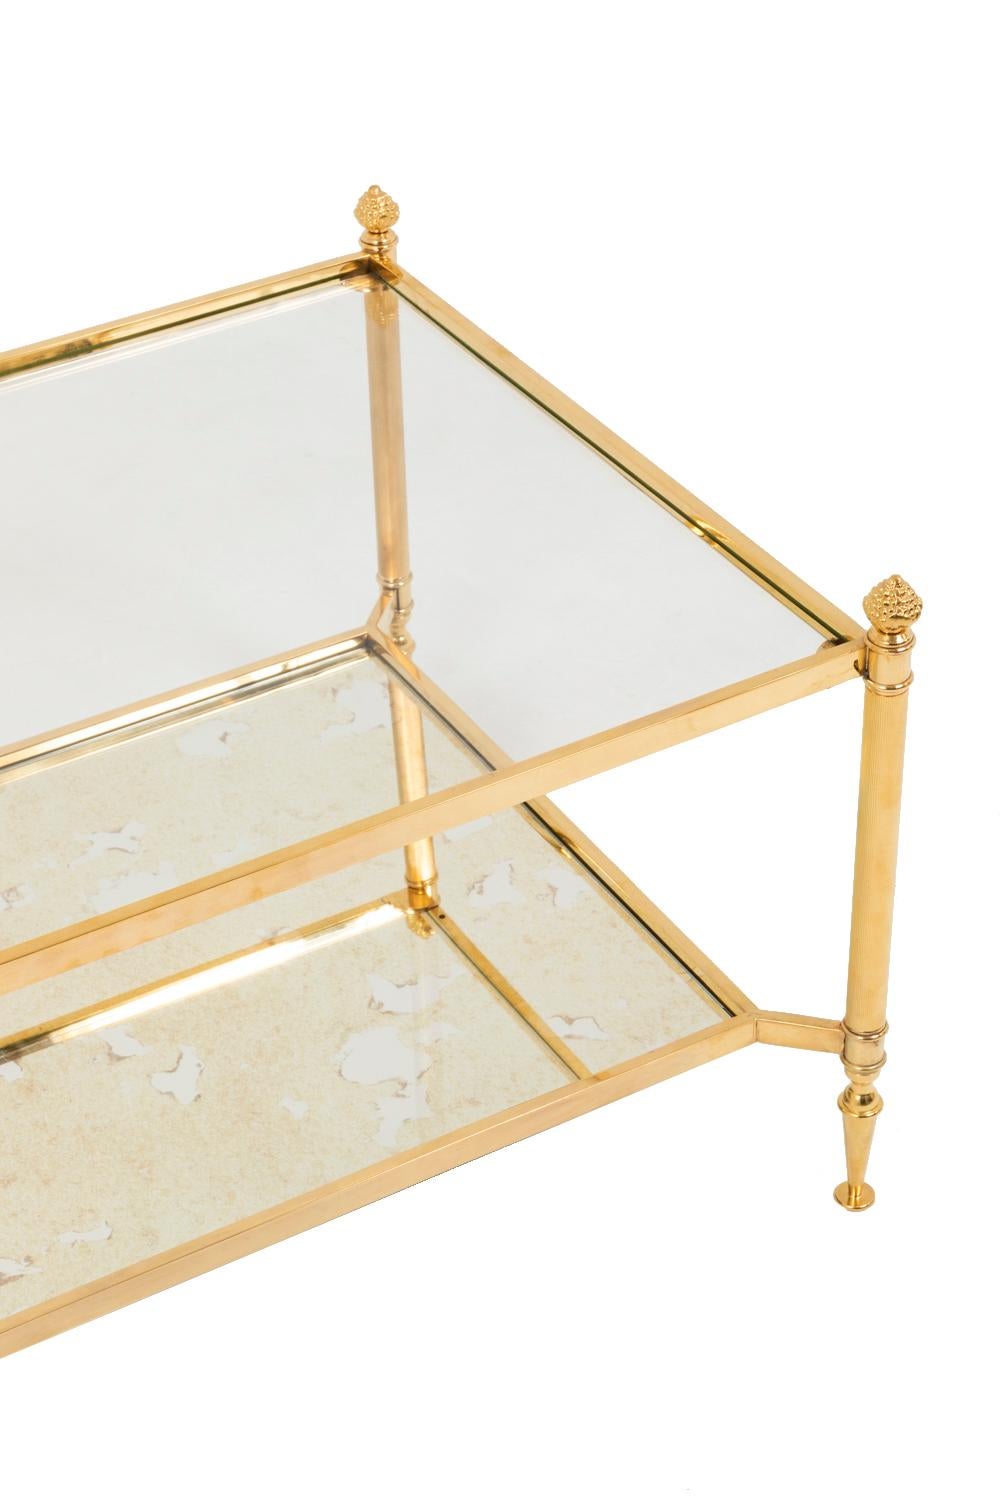 French Maison Jansen, Gilt Brass Coffee Table, Glass and Oxidized Mirror, 1970s